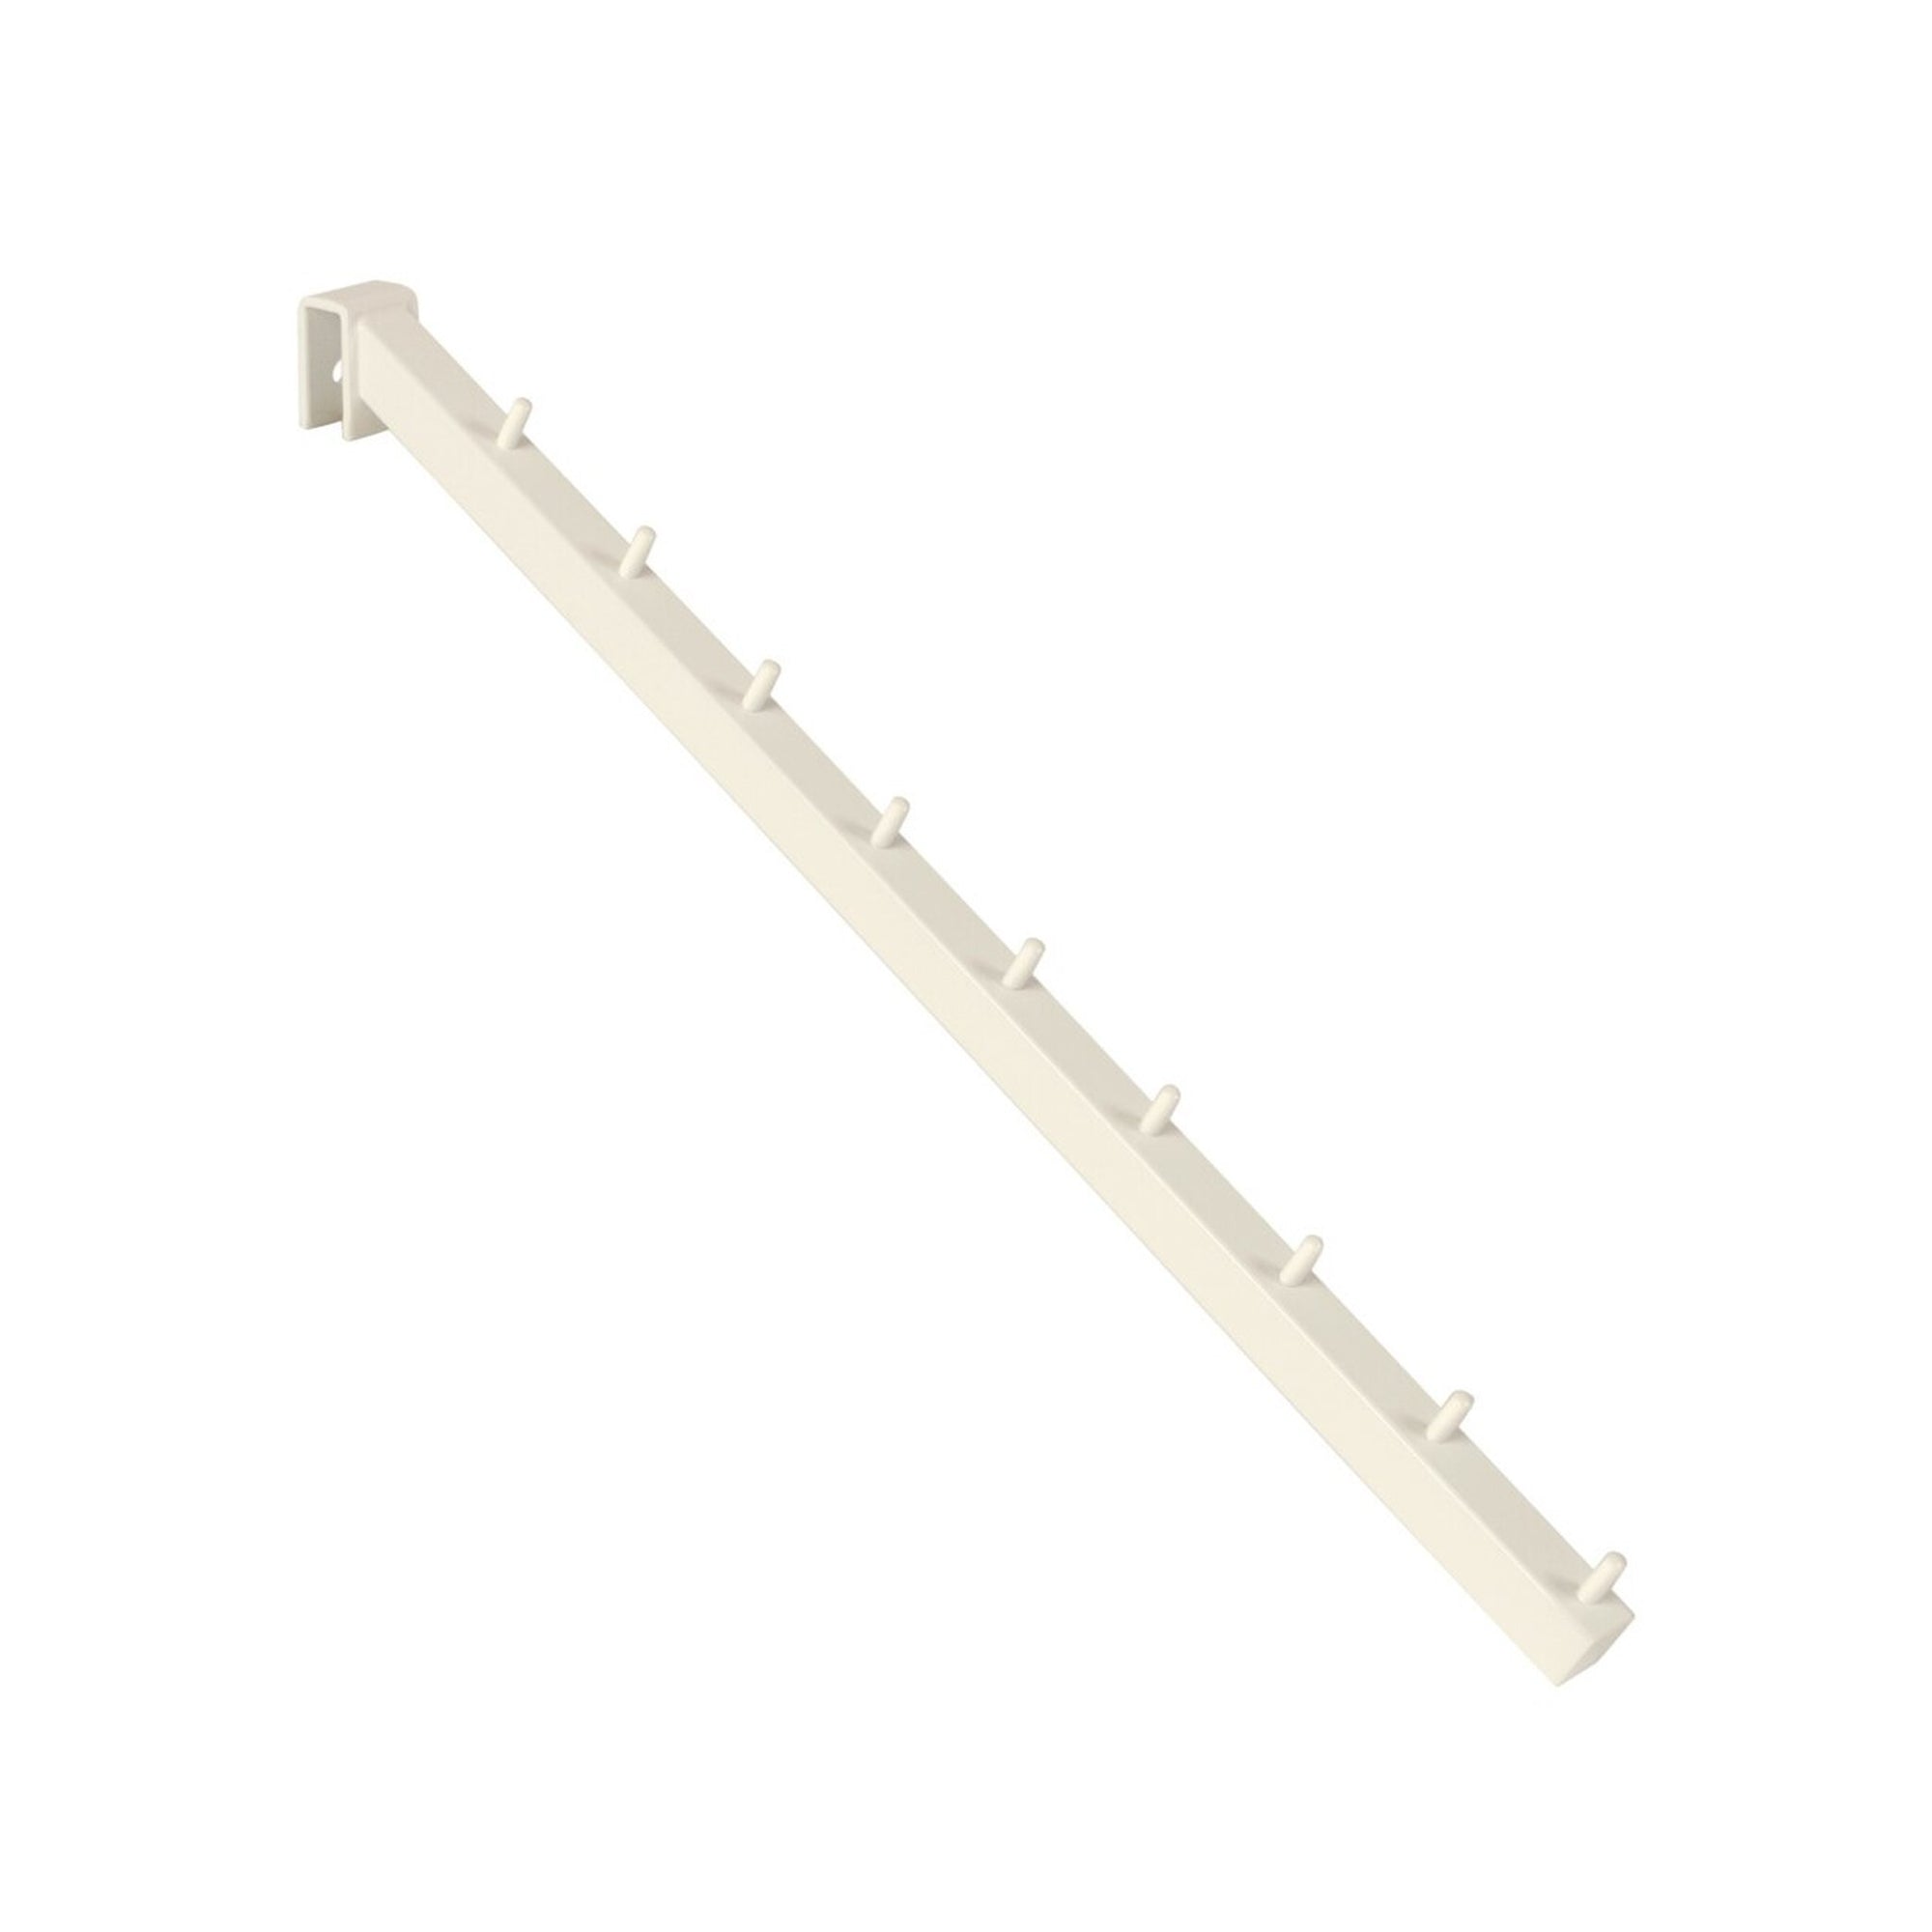 MAXe Backrail Waterfall Arm with 9 Pins - L460